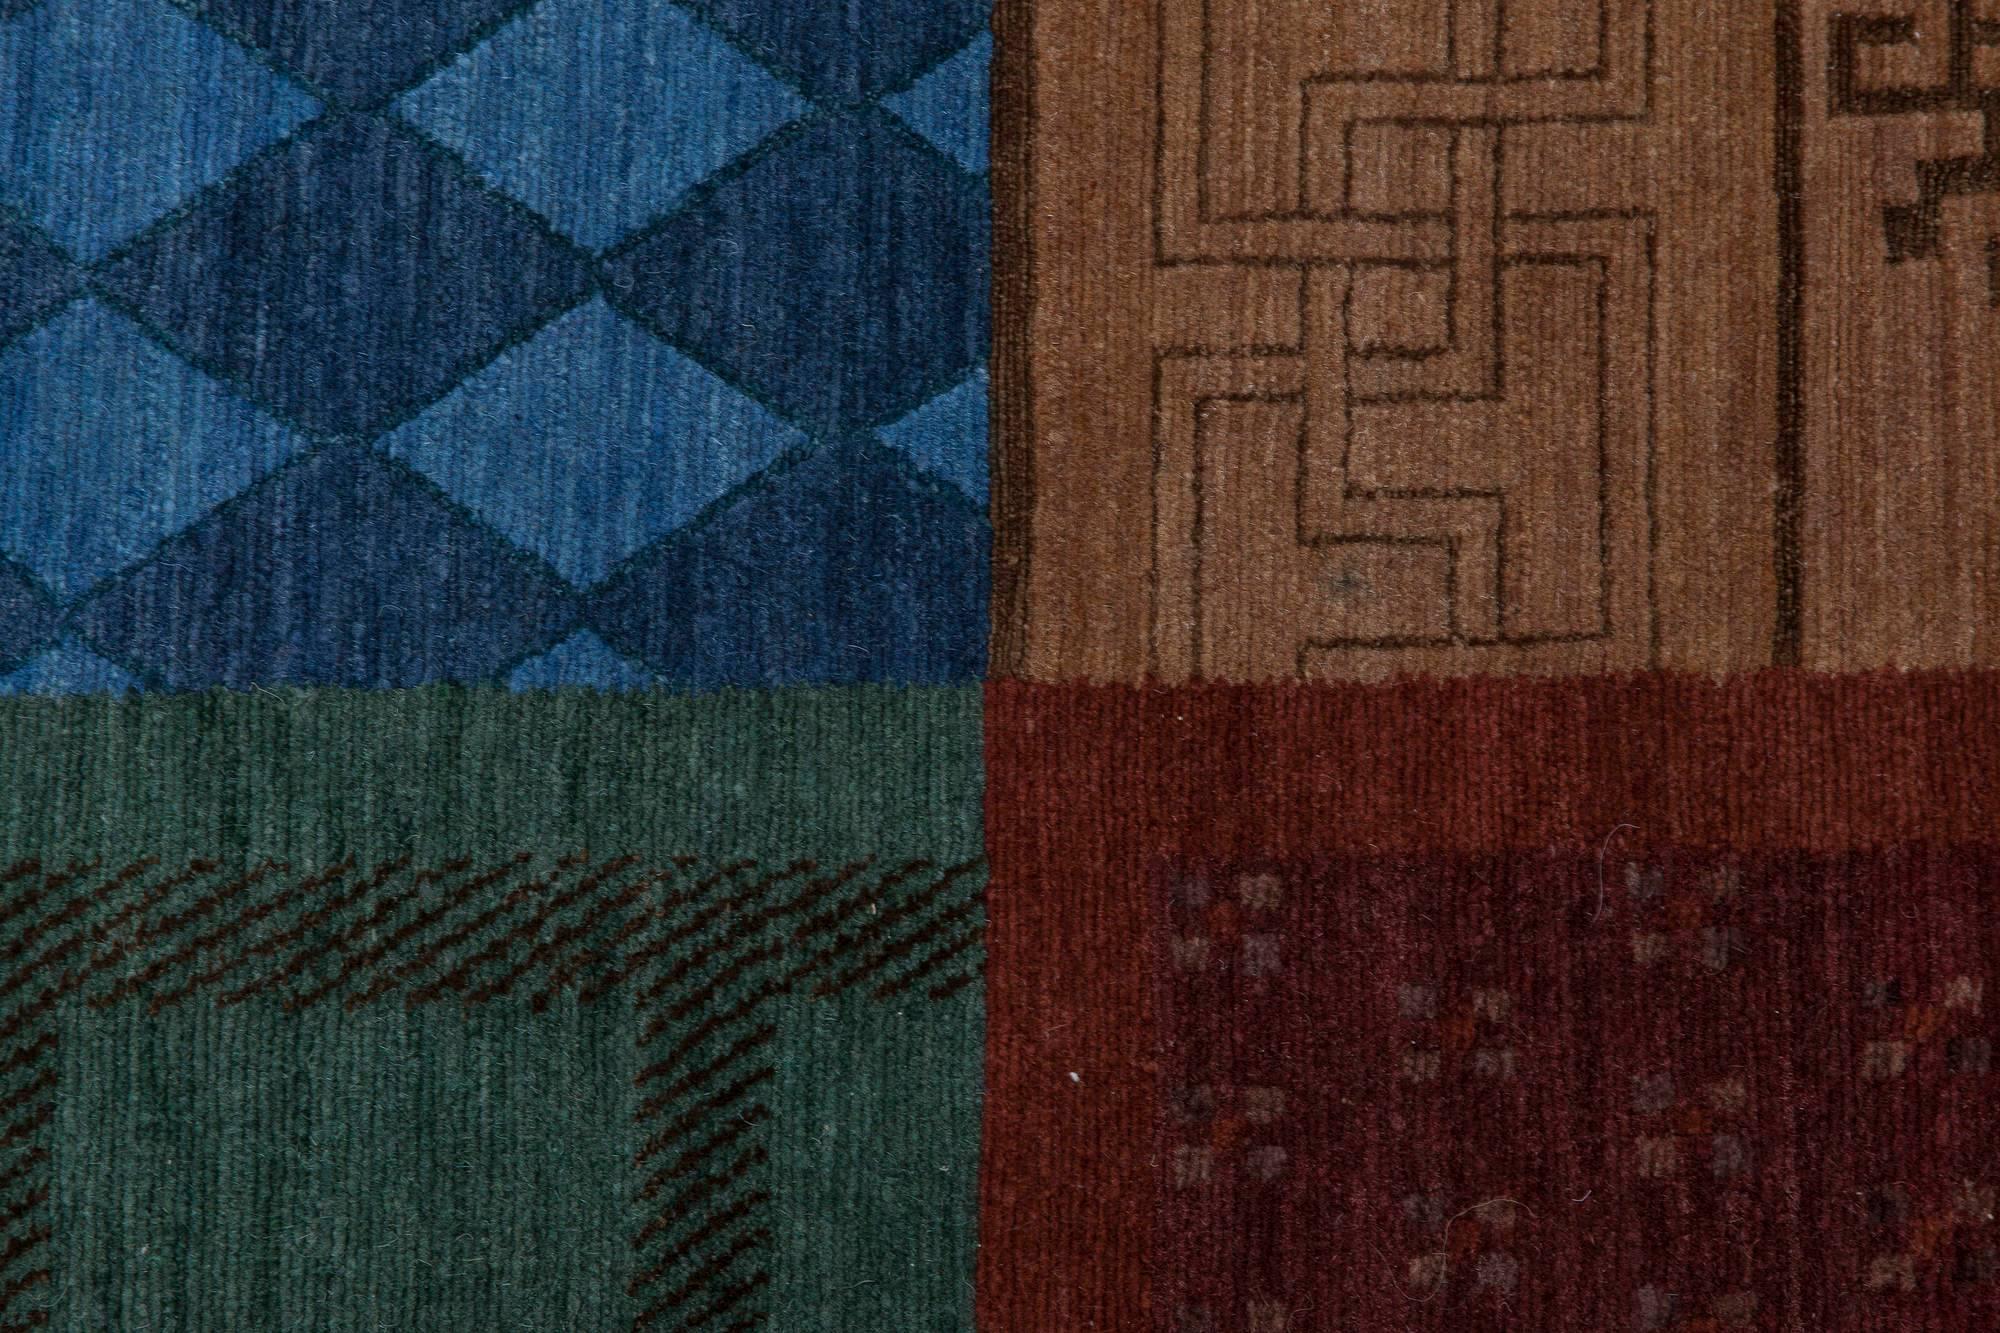 Contemporary Traditional Nepalese Handmade Wool Rug by Doris Leslie Blau
Size: 4'3